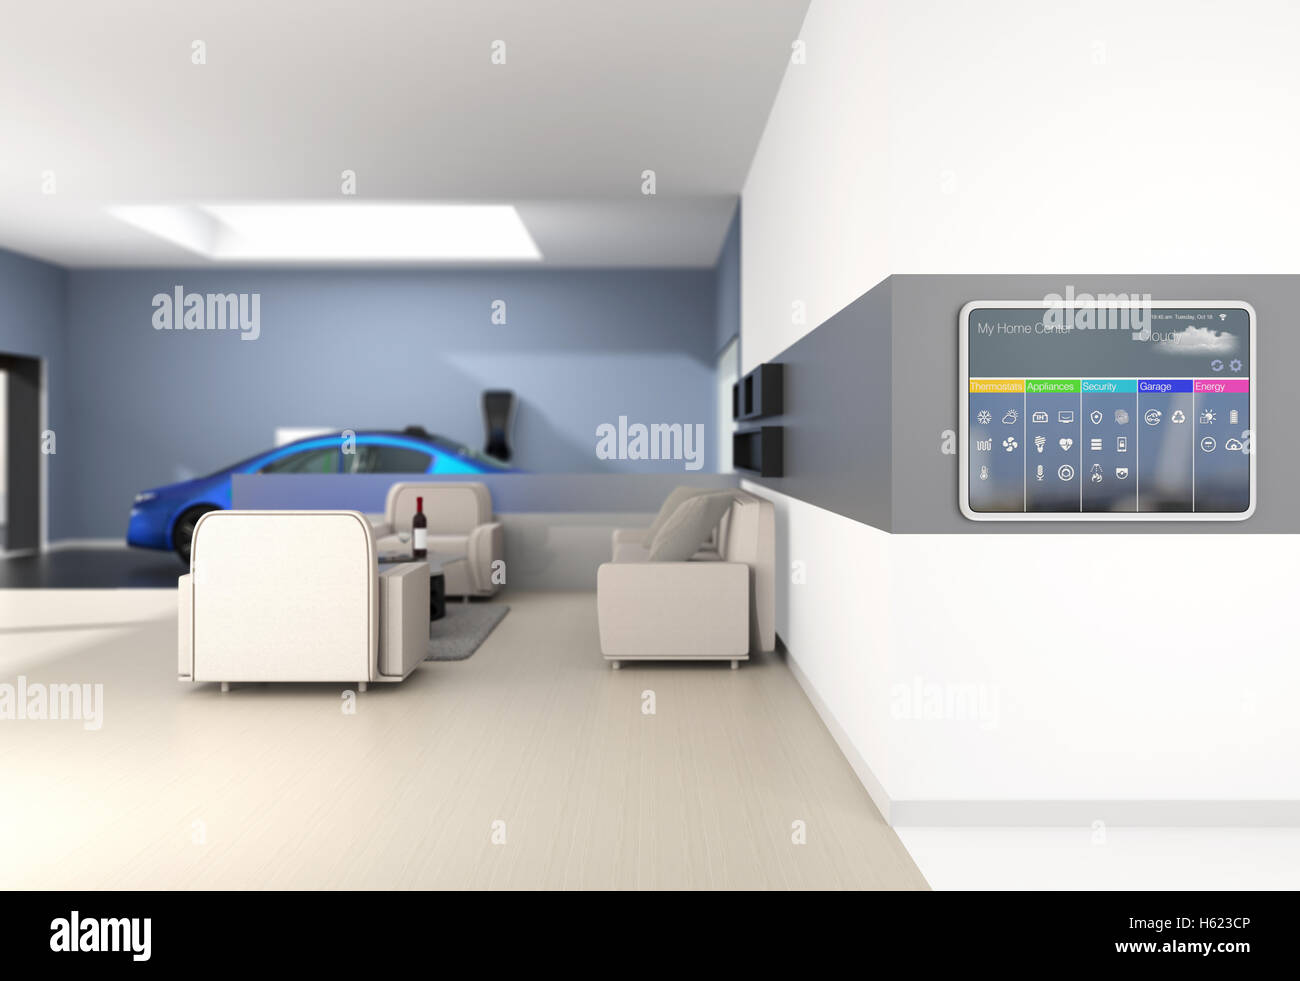 Home automation control panel on the wall. 3D rendering image. Stock Photo